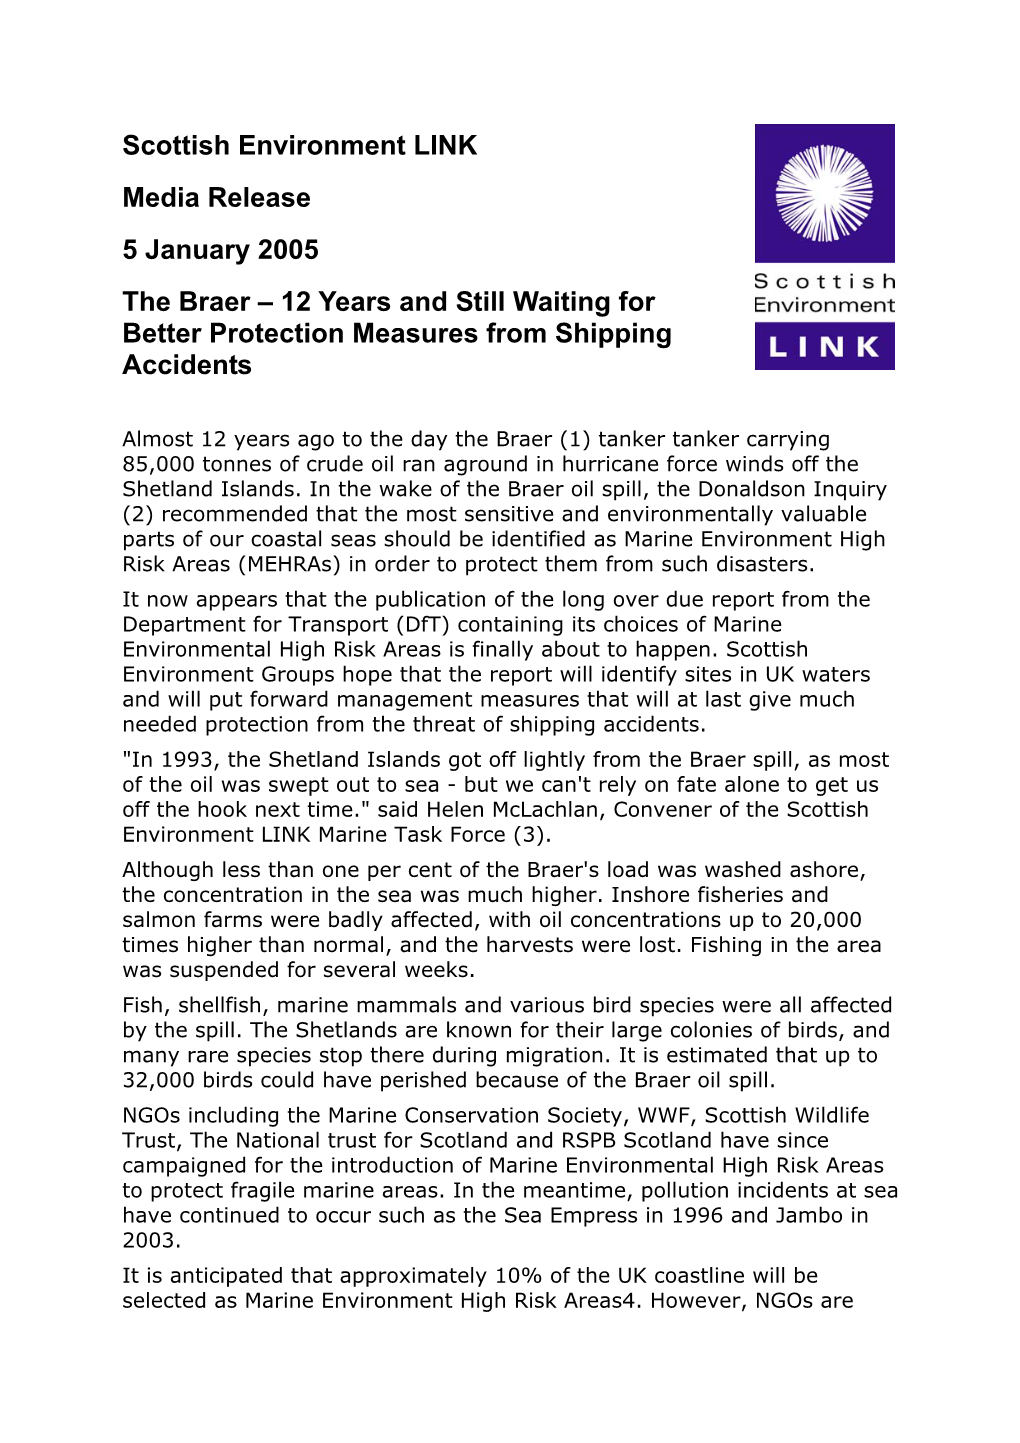 Scottish Environment LINK Media Release 5 January 2005 the Braer – 12 Years and Still Waiting for Better Protection Measures from Shipping Accidents